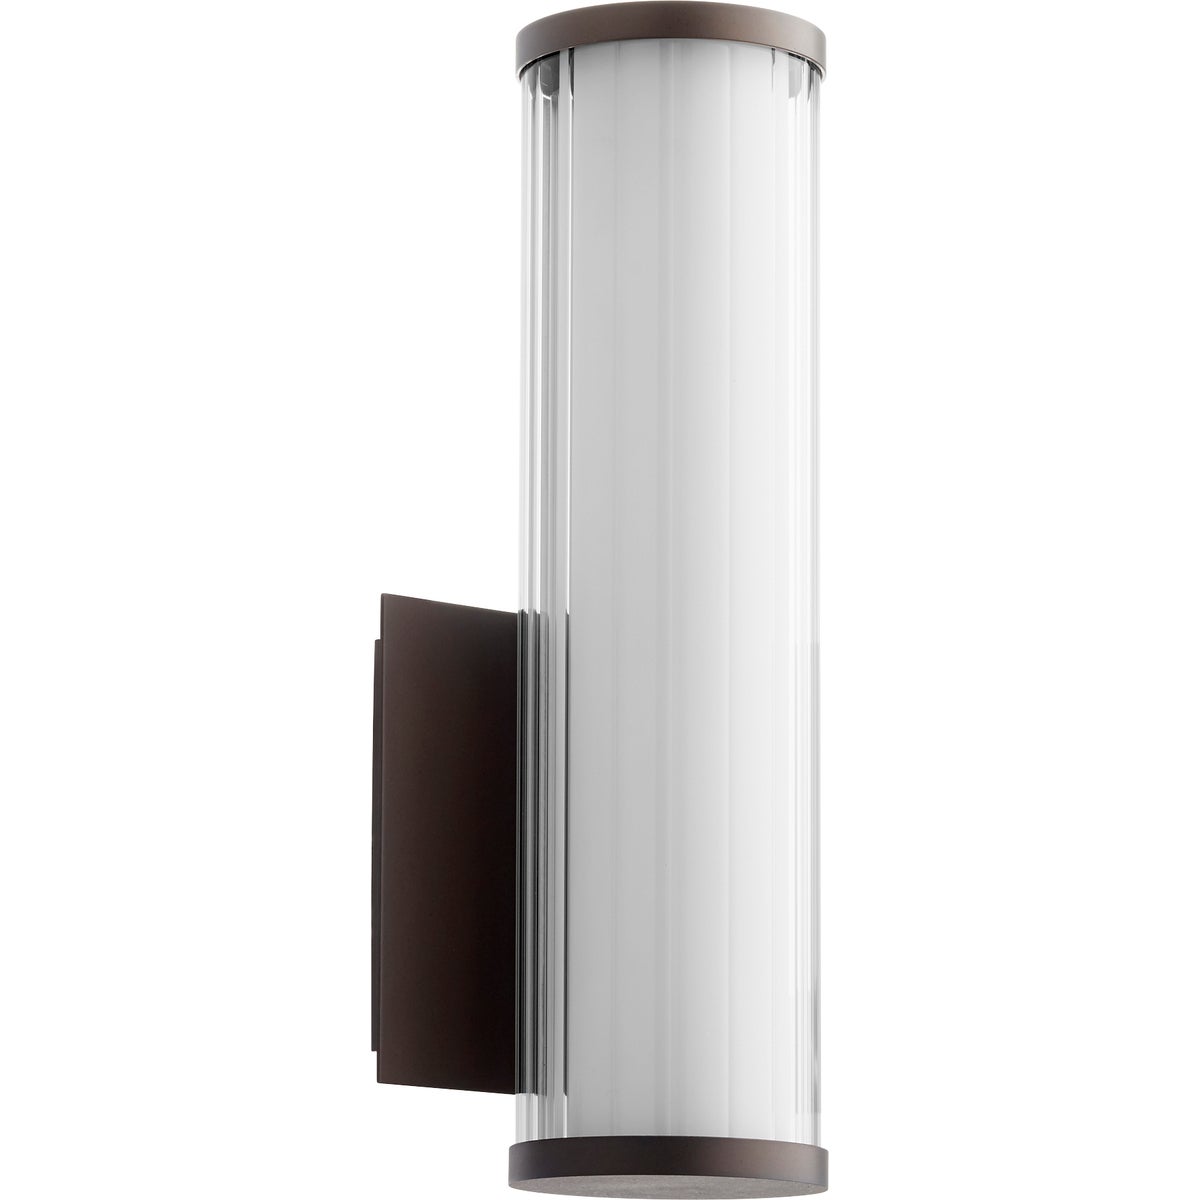 LED Wall Sconce with clean lines and subtle sophistication, perfect for modern applications. 9W, 120V, LED lamp with 689 lumens and 3000K color temperature. Dimmable, UL Listed, and suitable for damp locations. 2-year warranty.